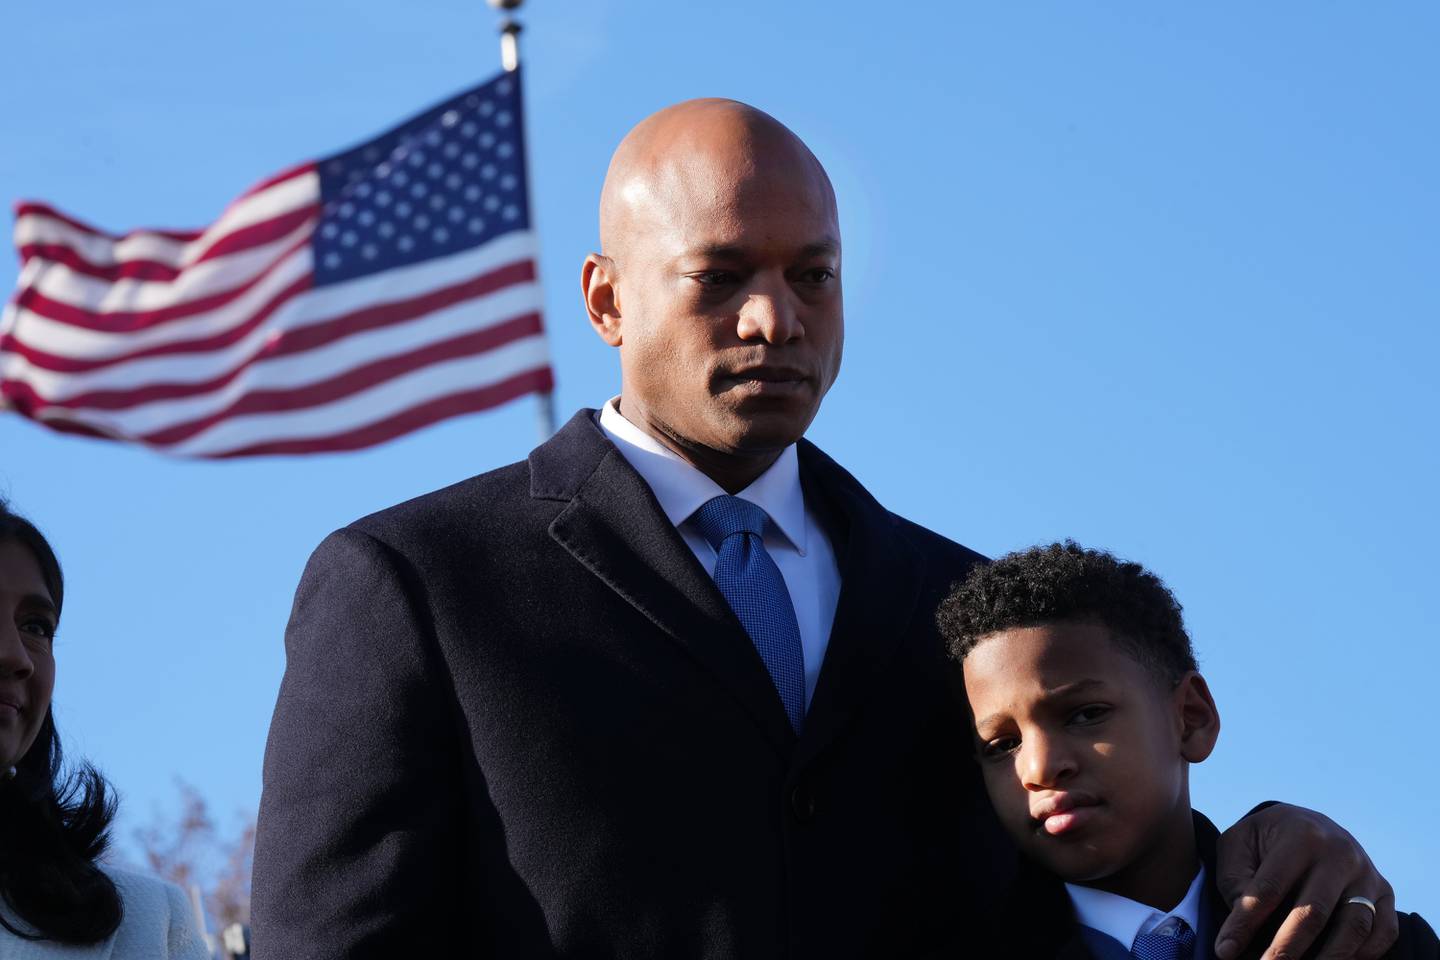 Wes Moore and his son, James Moore, arrive at the Kunta Kinte-Alex Haley Memorial to lay a wreath and say a prayer before the governor-elect is sworn in as the first African American governor of the state of Maryland.